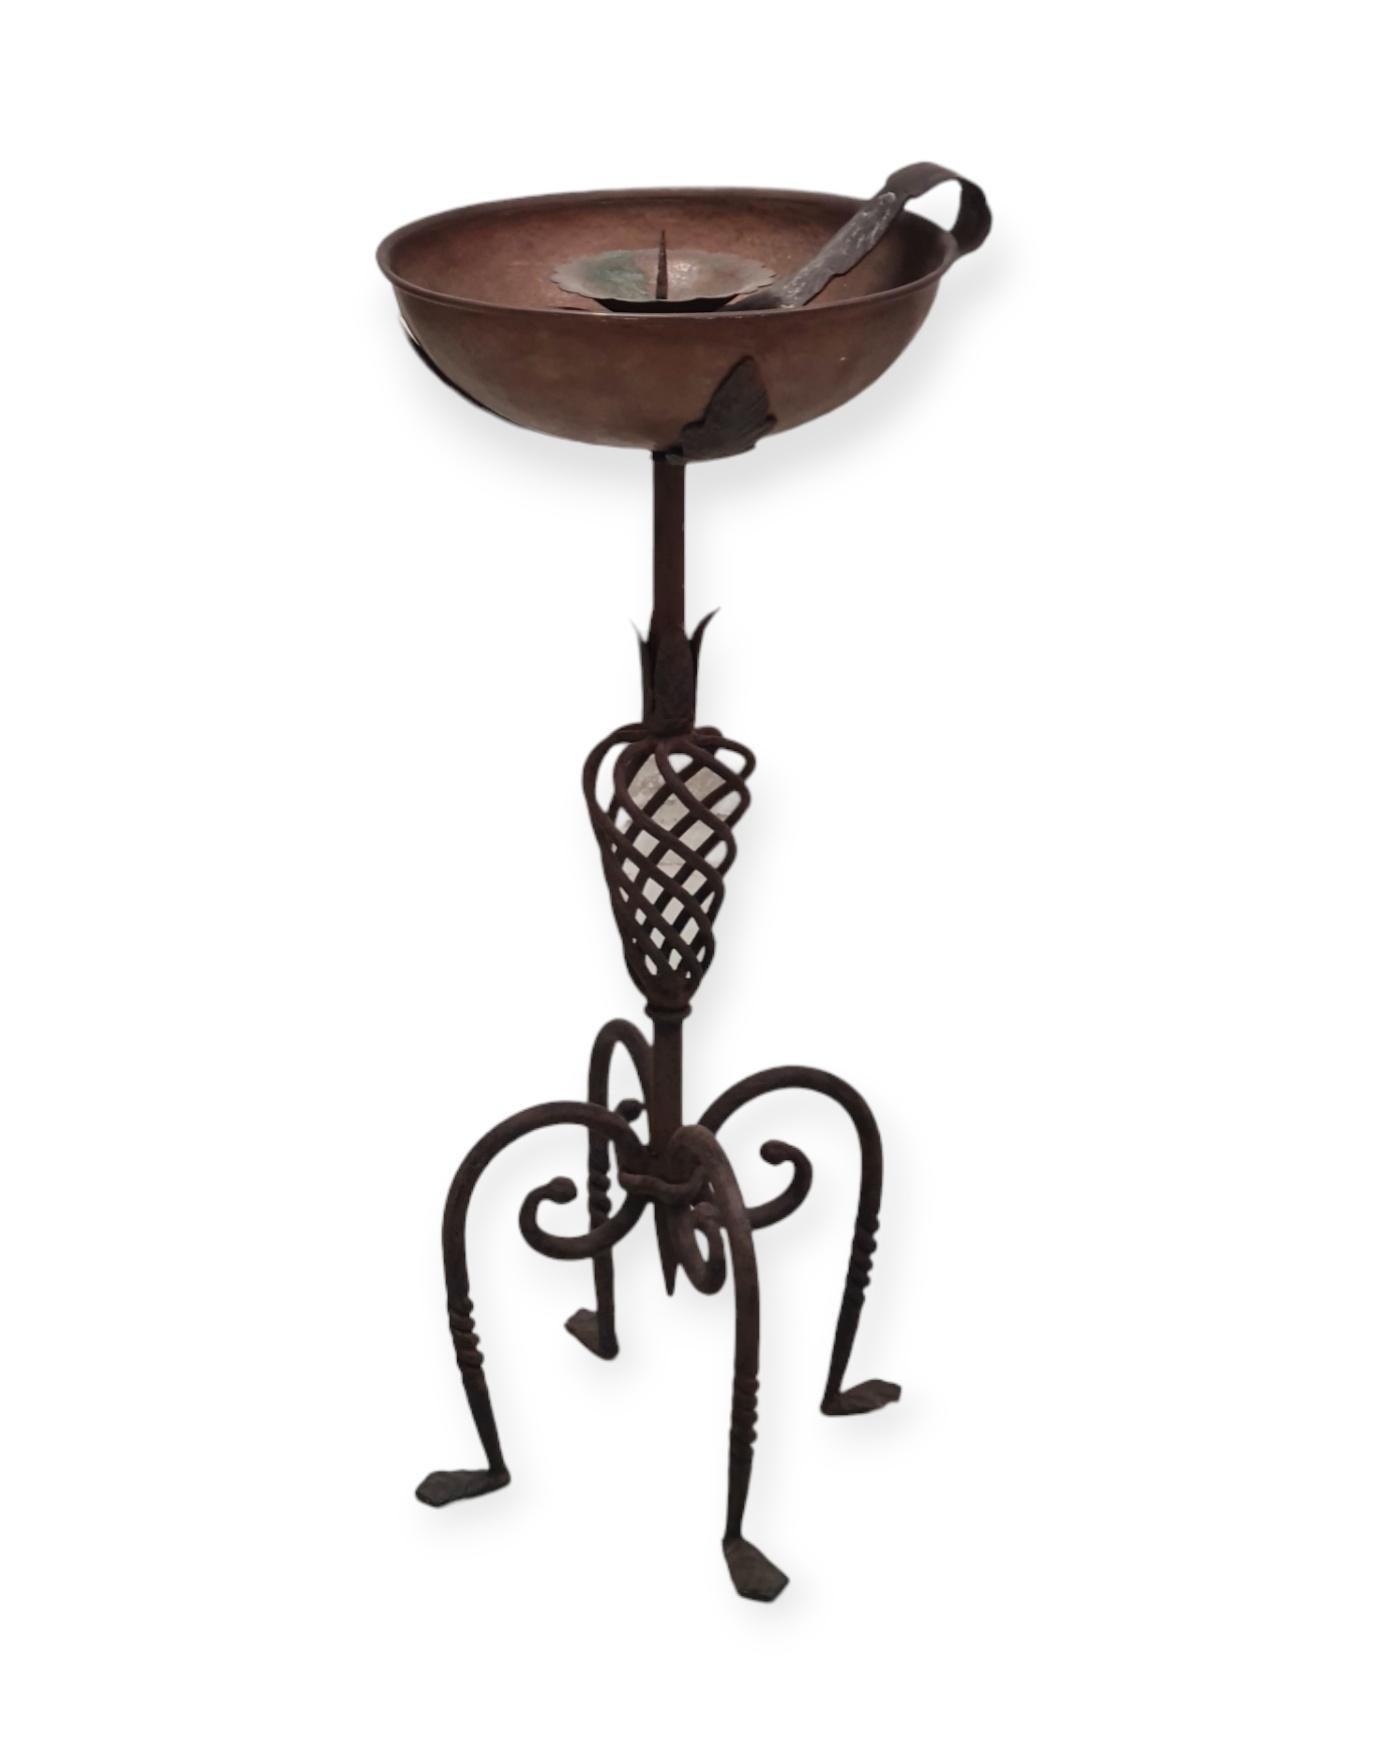 Arts and Crafts Decorative Antti Hakkarainen Torchére / Birdbath in Wrought Iron and Copper For Sale